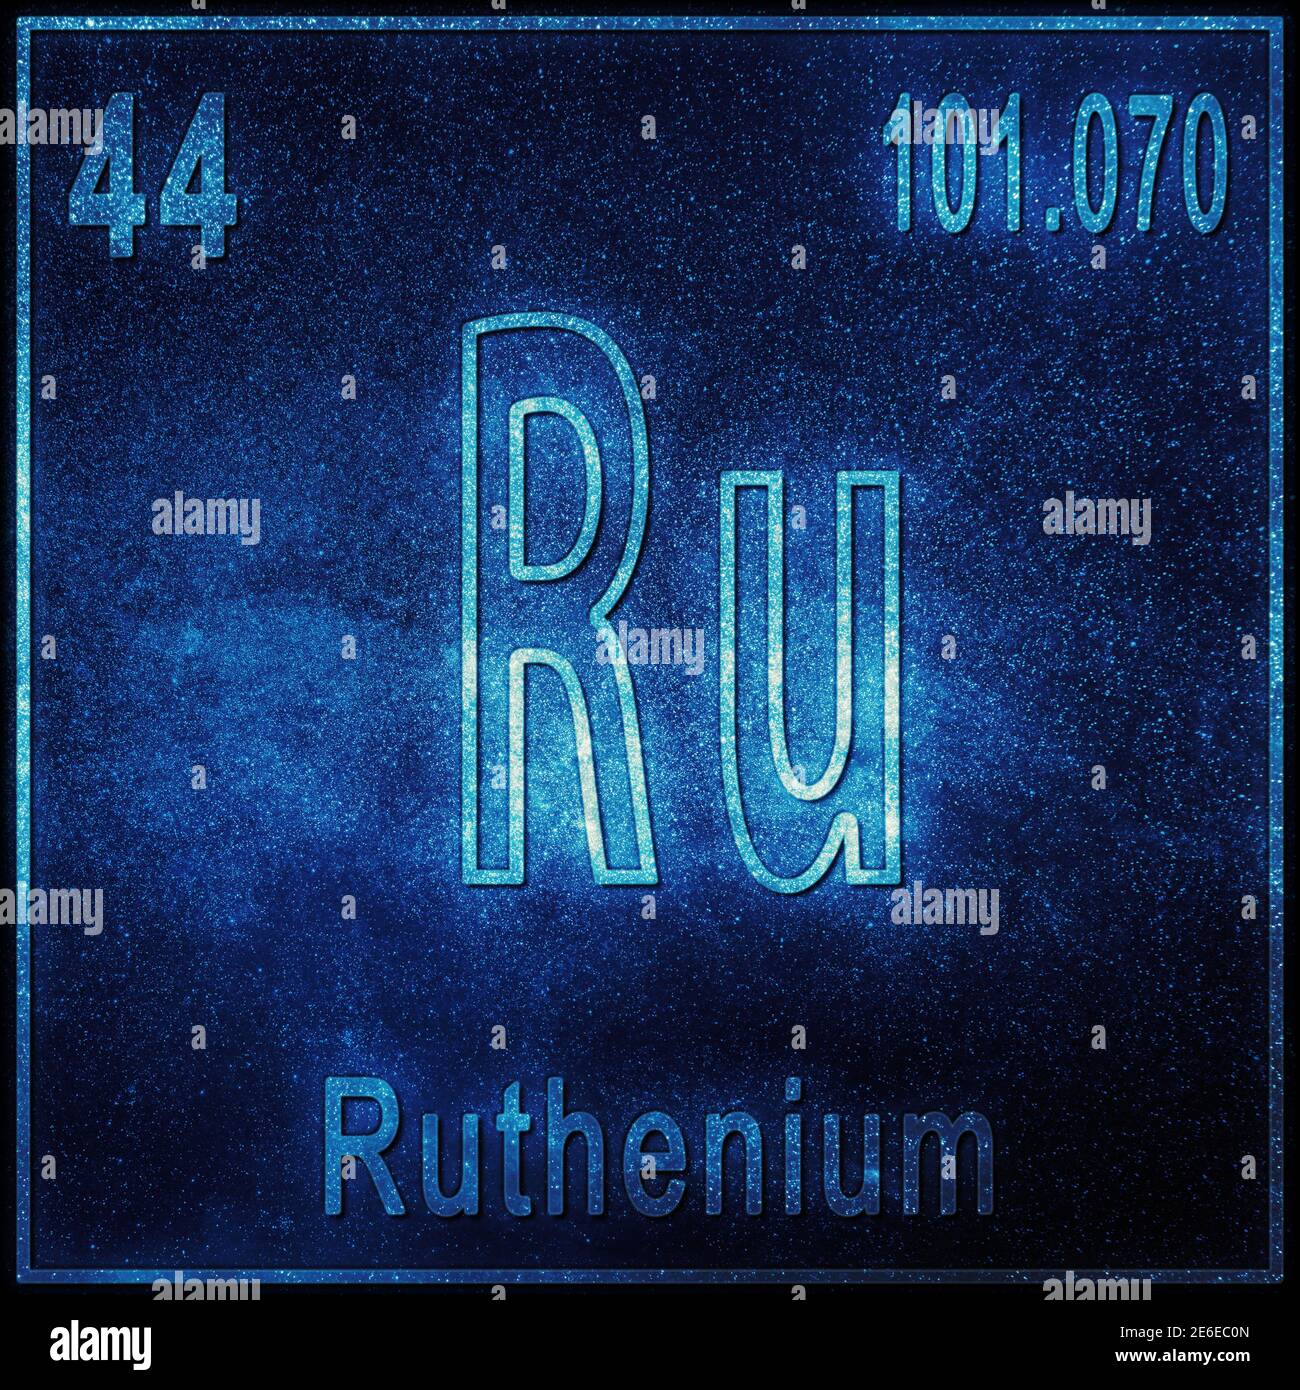 Ruthenium chemical element, Sign with atomic number and atomic weight, Periodic Table Element Stock Photo